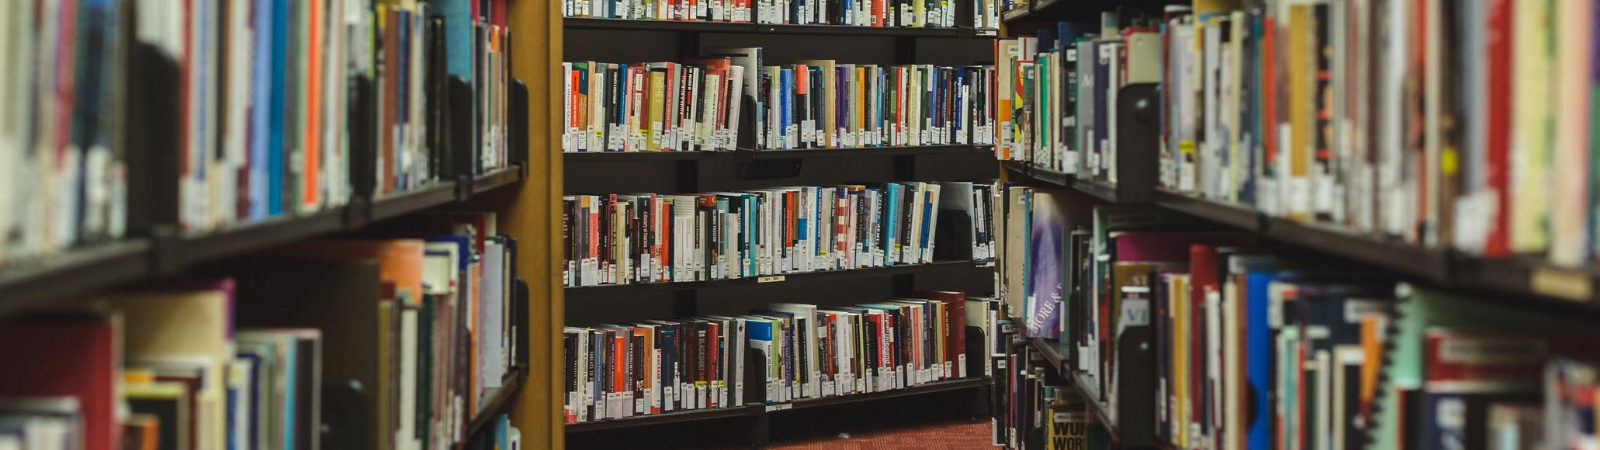 Picture of many shelves of books at a library